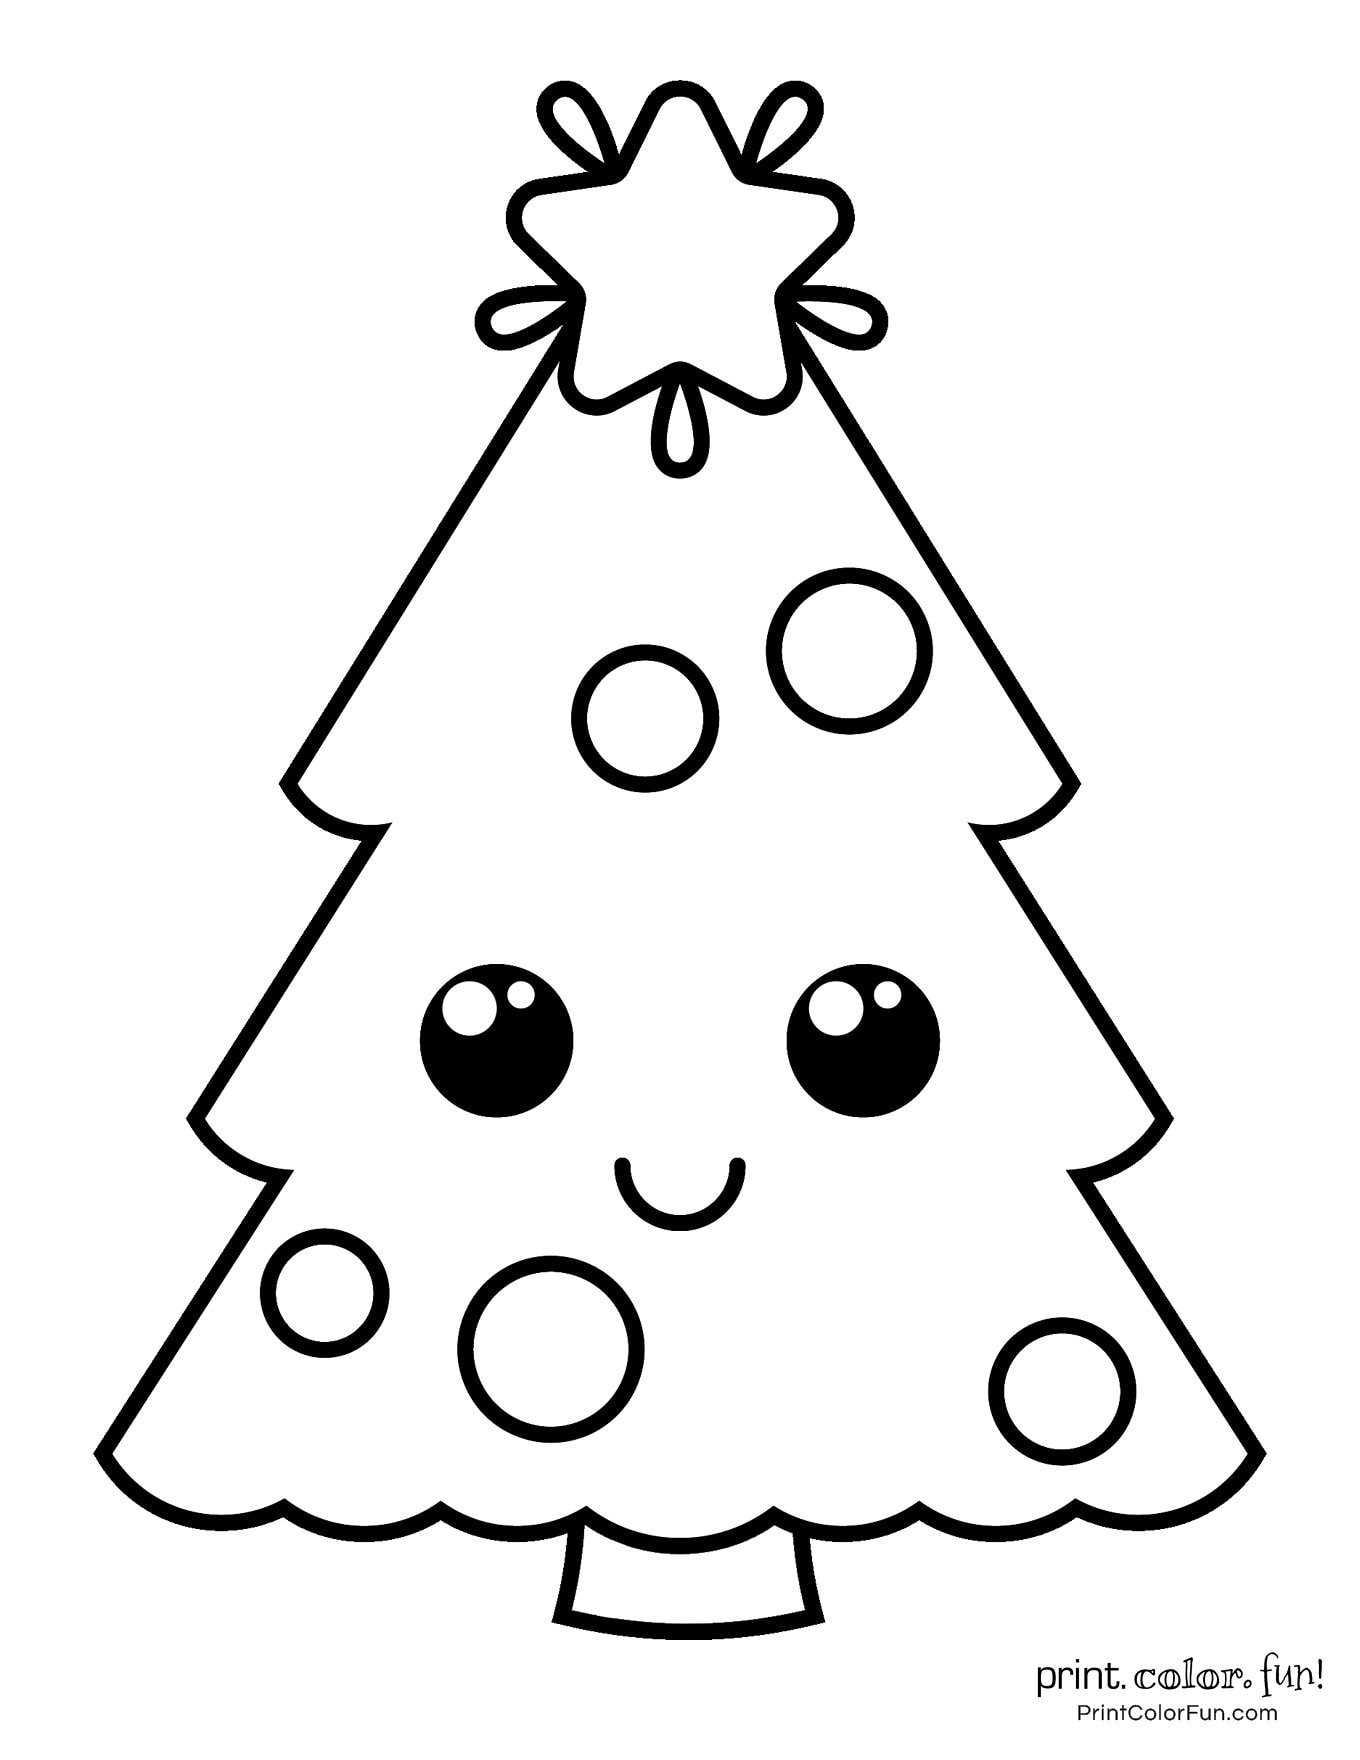 top-100-christmas-tree-coloring-pages-the-ultimate-free-printable-collection-print-color-fun